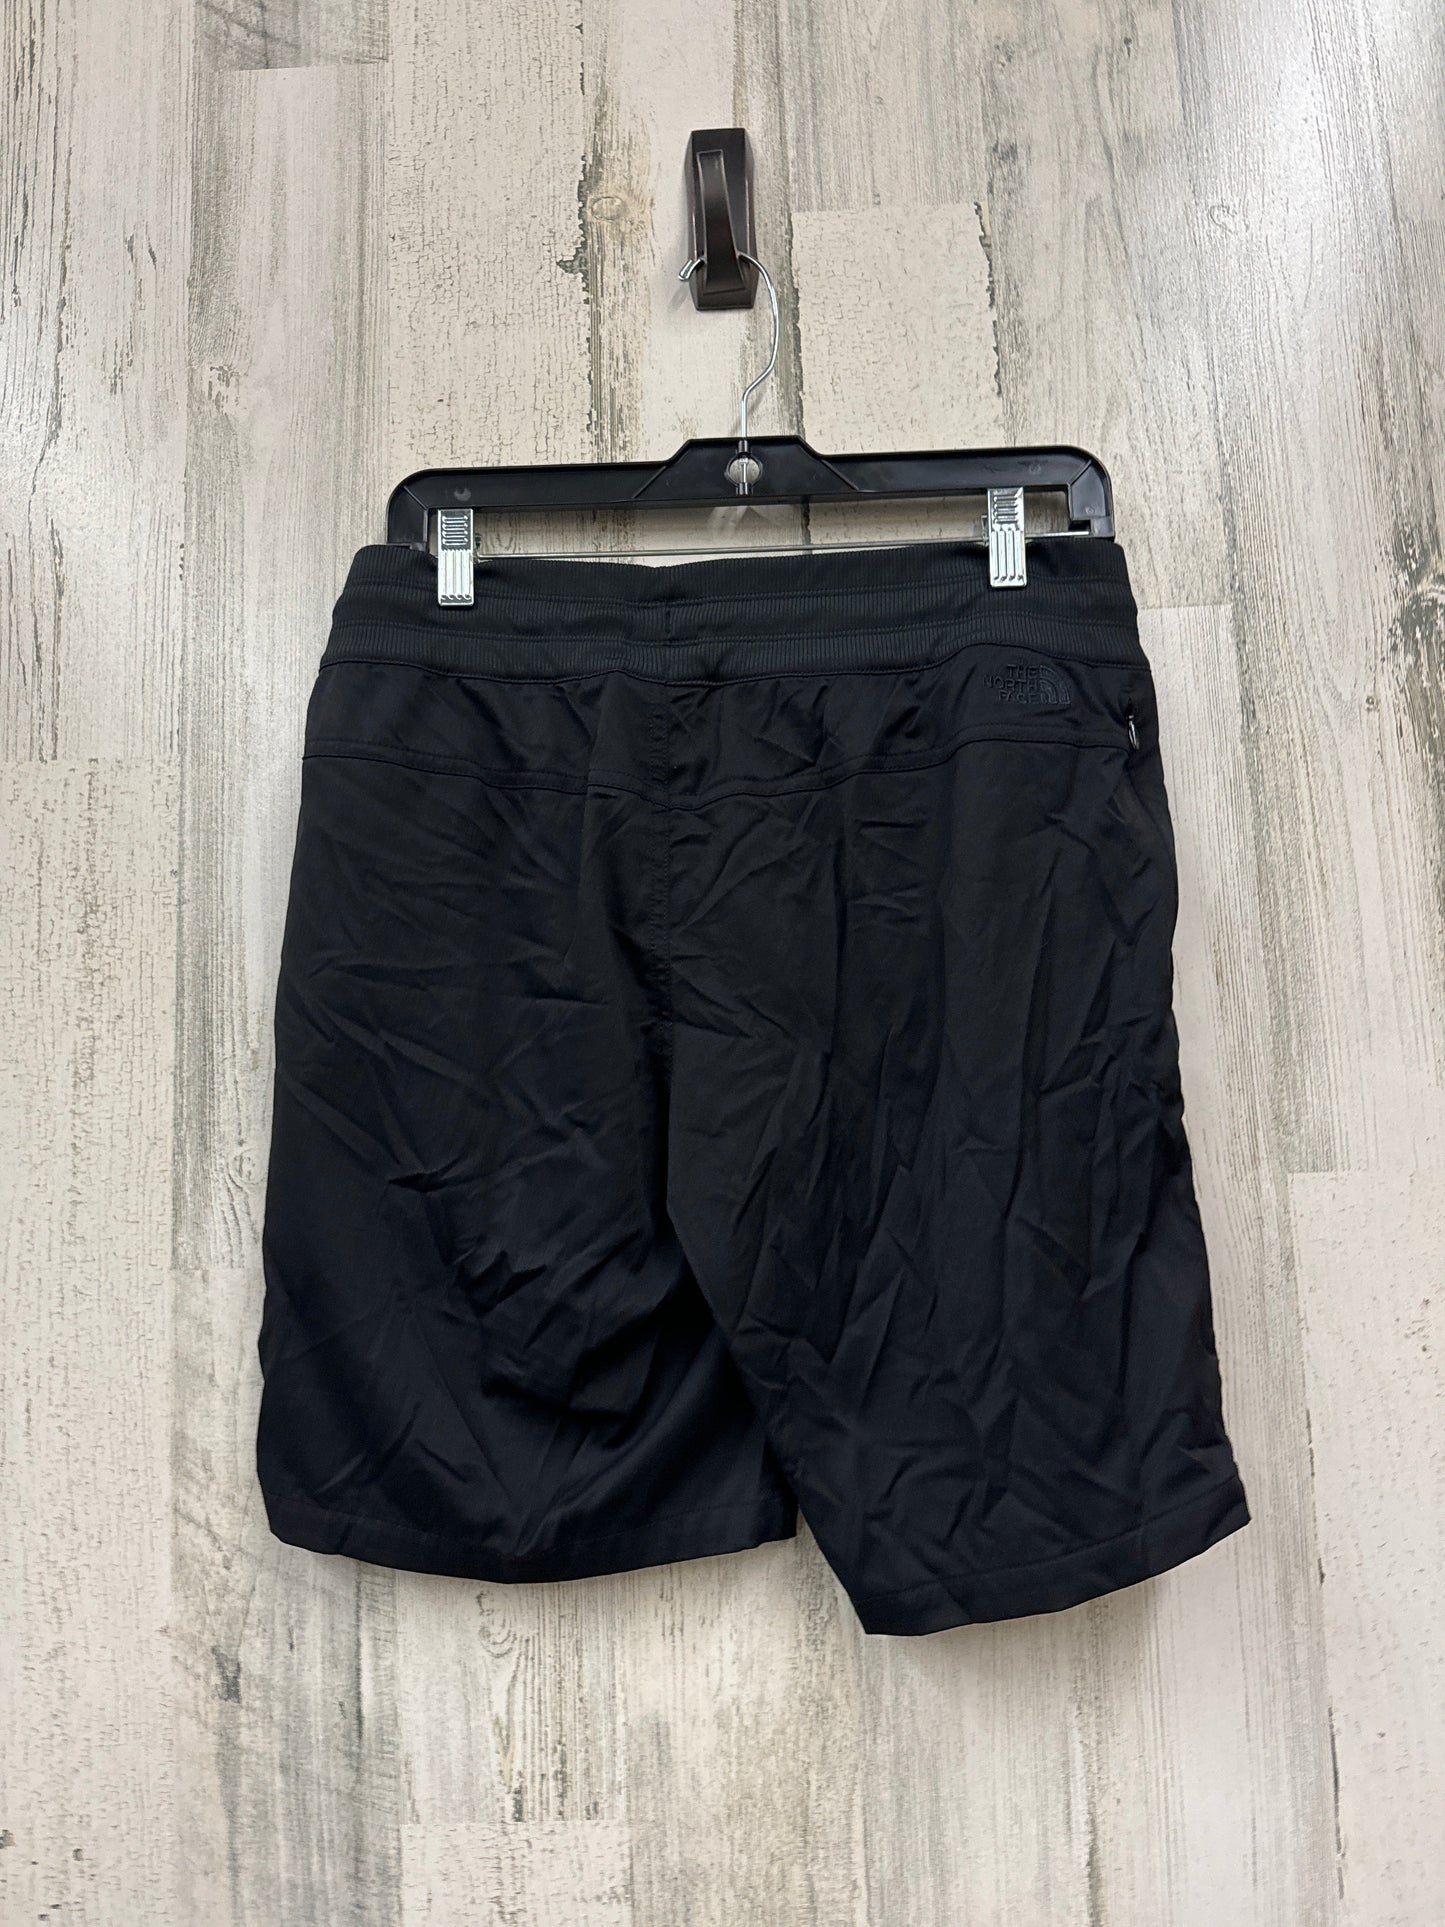 Athletic Shorts By The North Face  Size: M